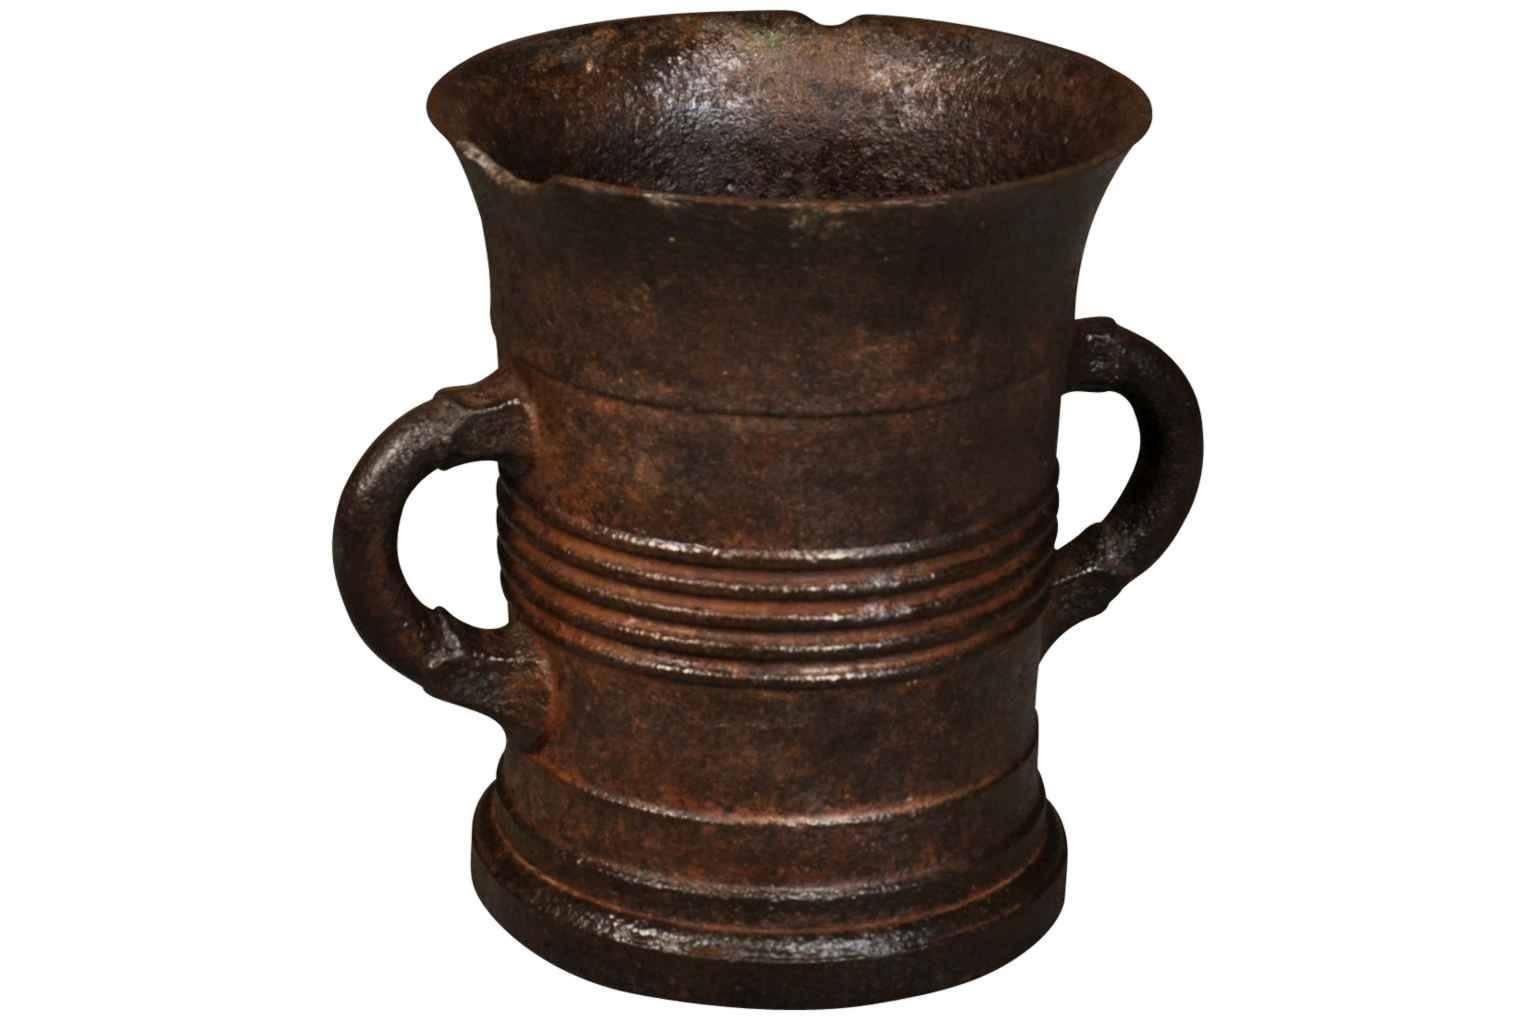 A wonderful 18th century French cast iron mortar. A great vessel for flower arranging or storing kitchen utensils.